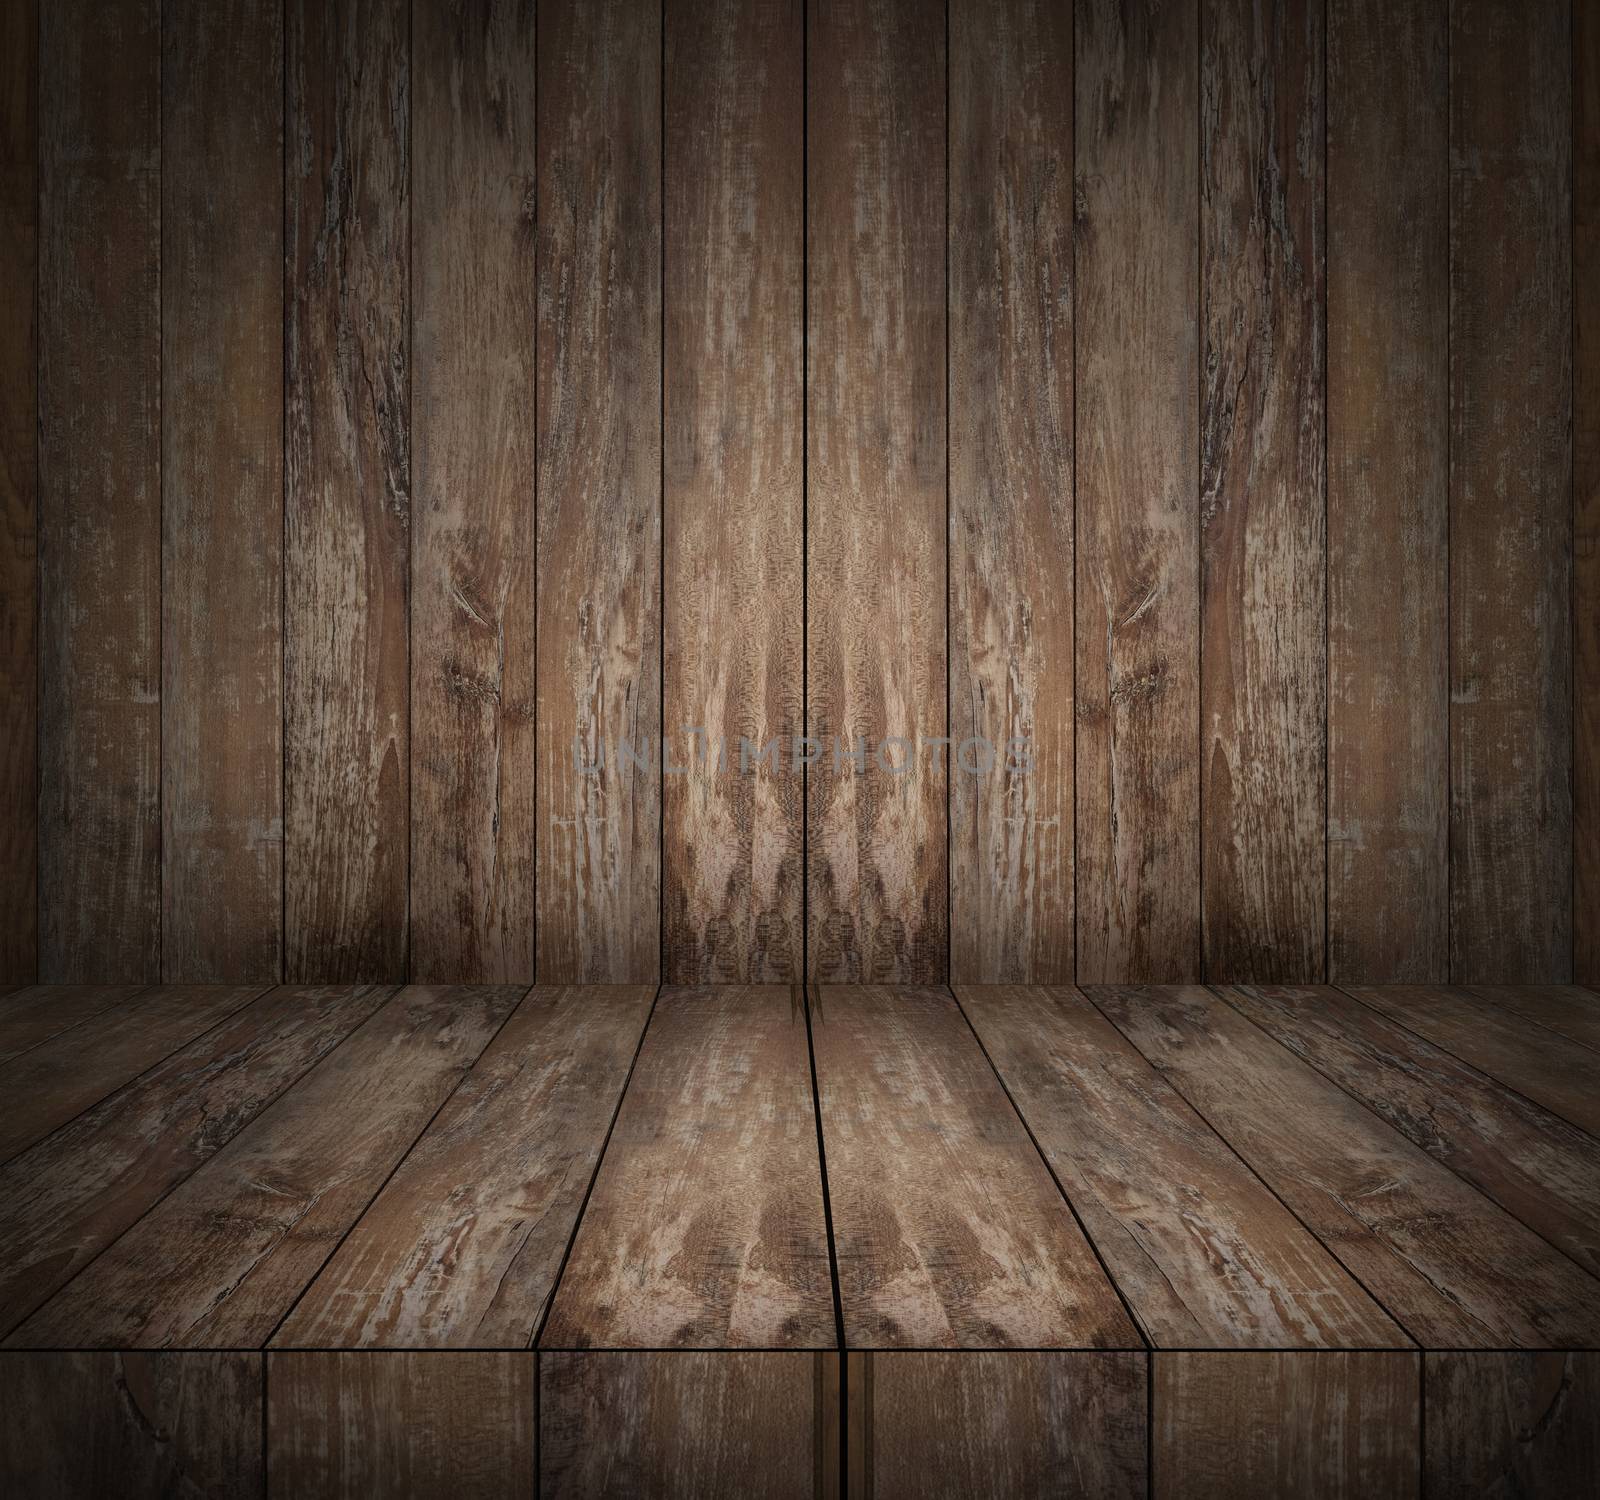 wooden floor and wall by dolgachov